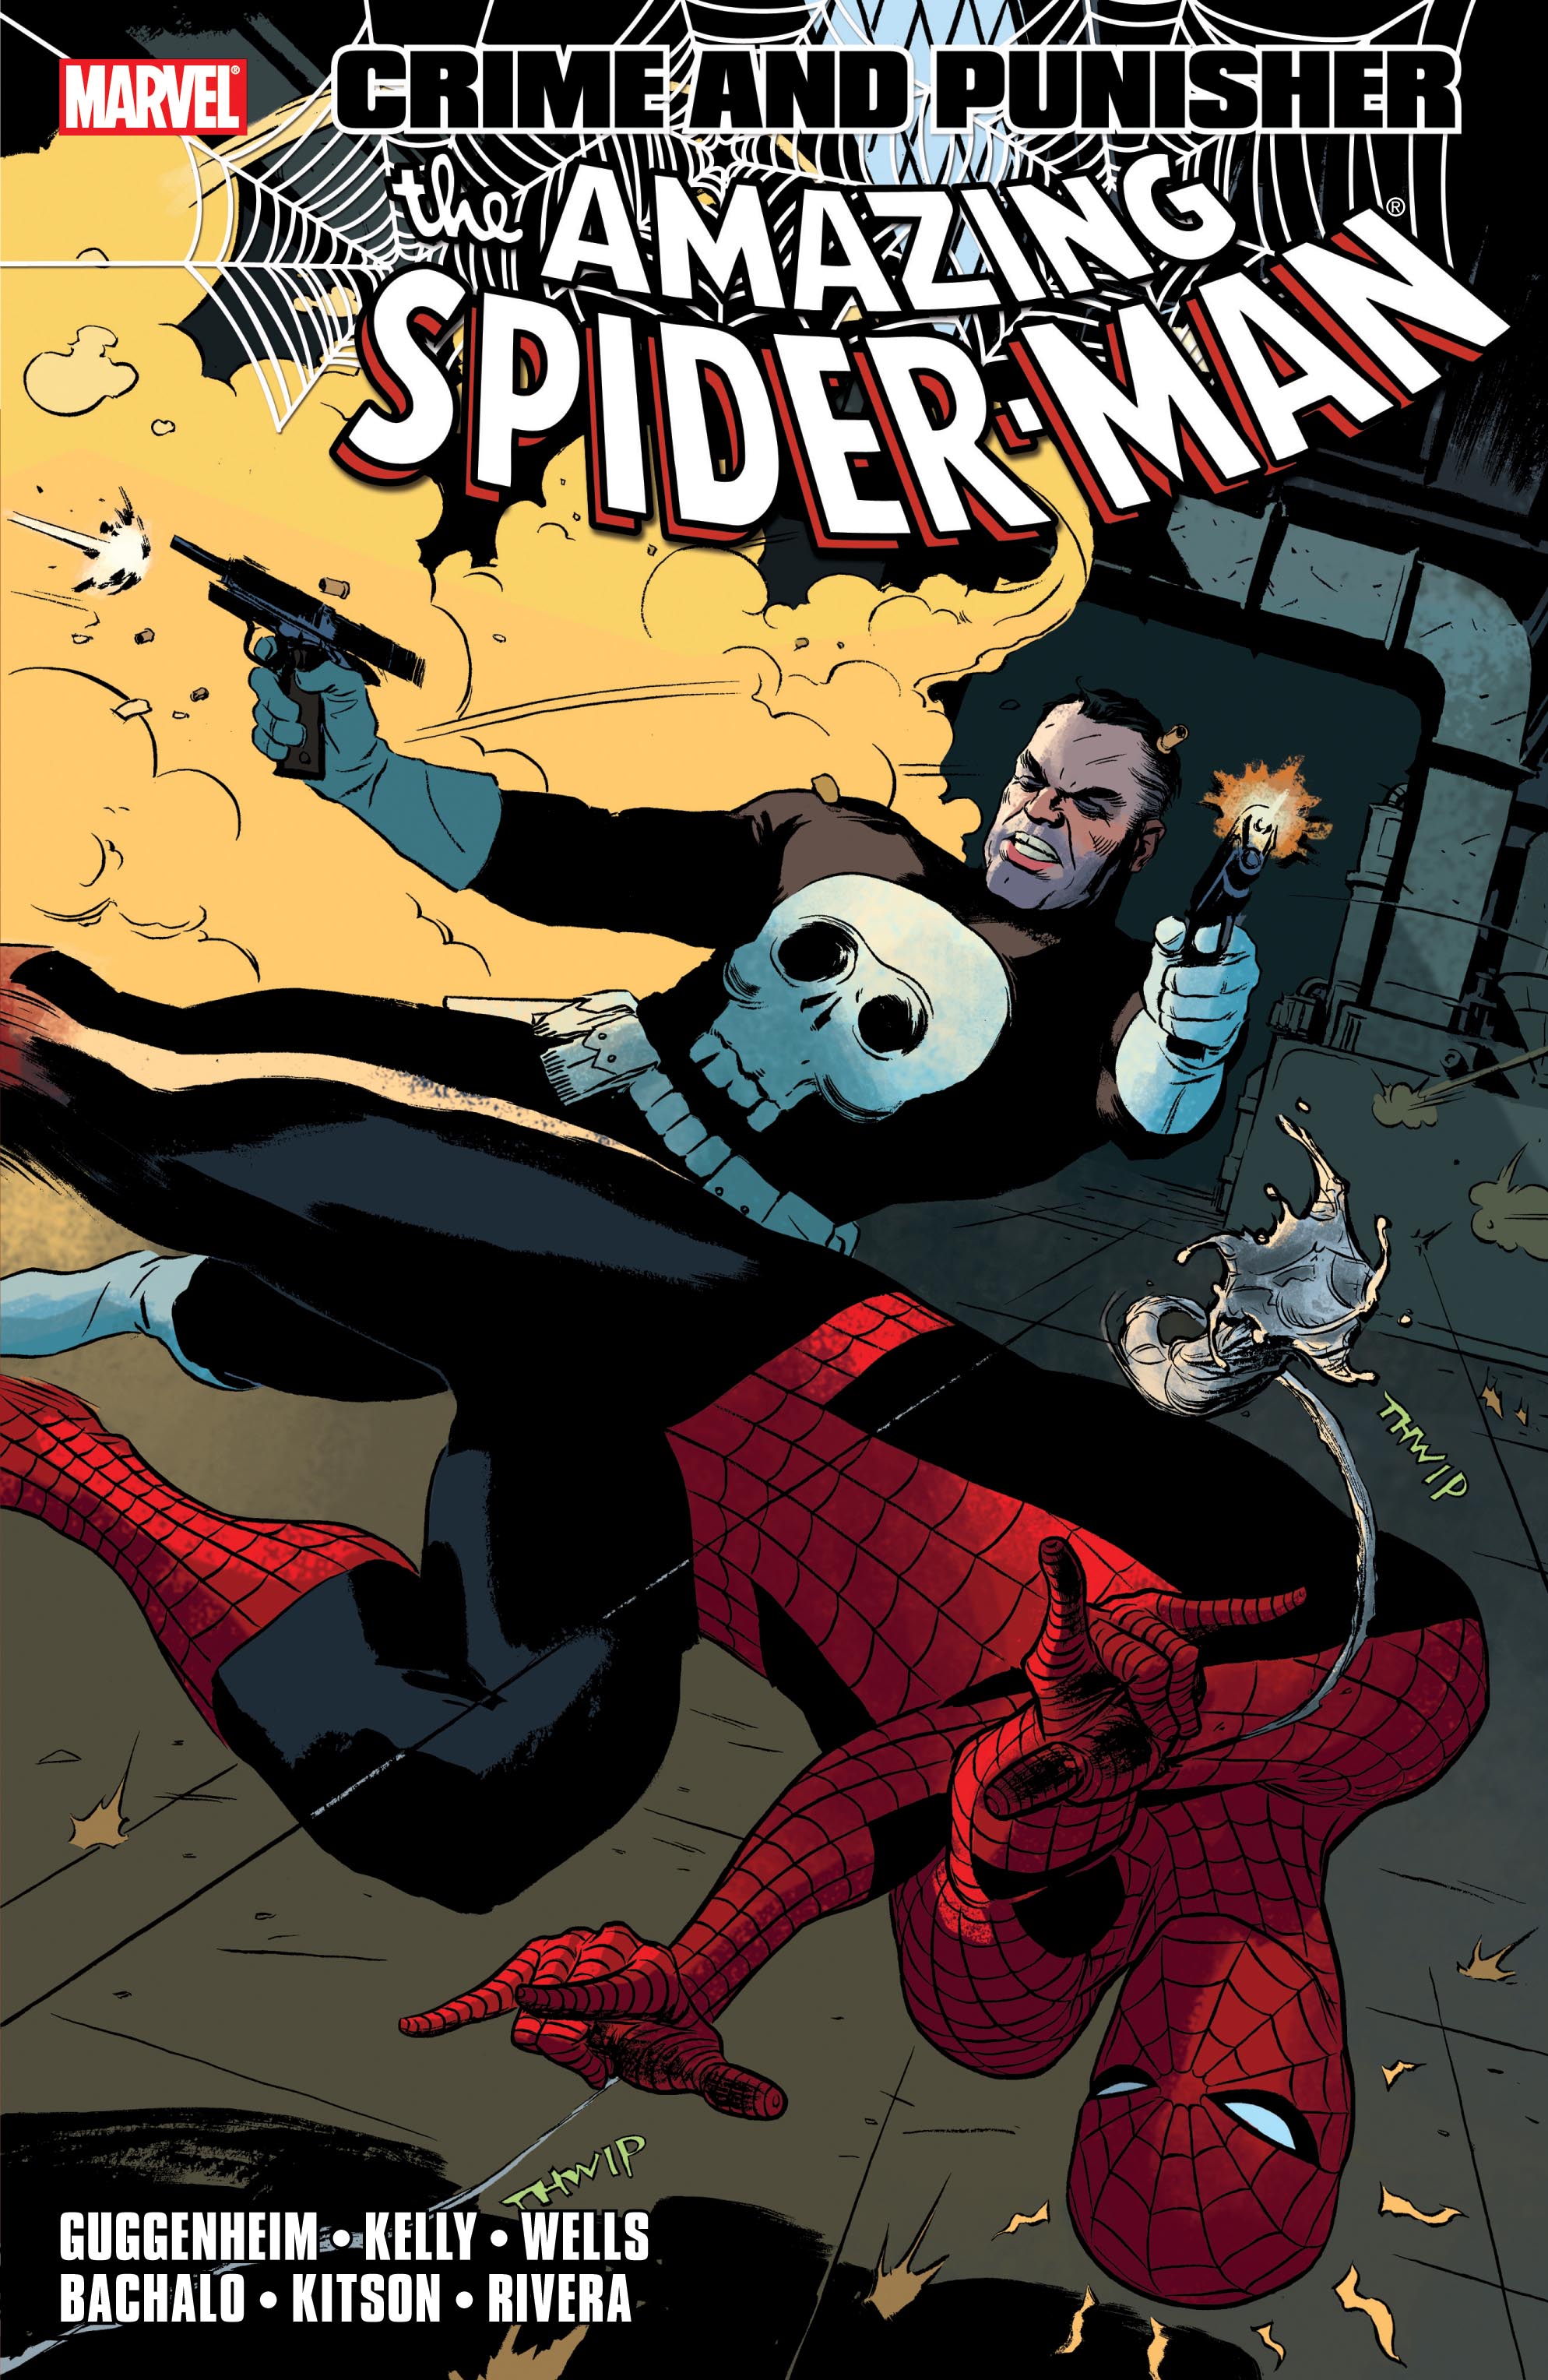 SPIDER-MAN: CRIME AND PUNISHER TPB (Trade Paperback)